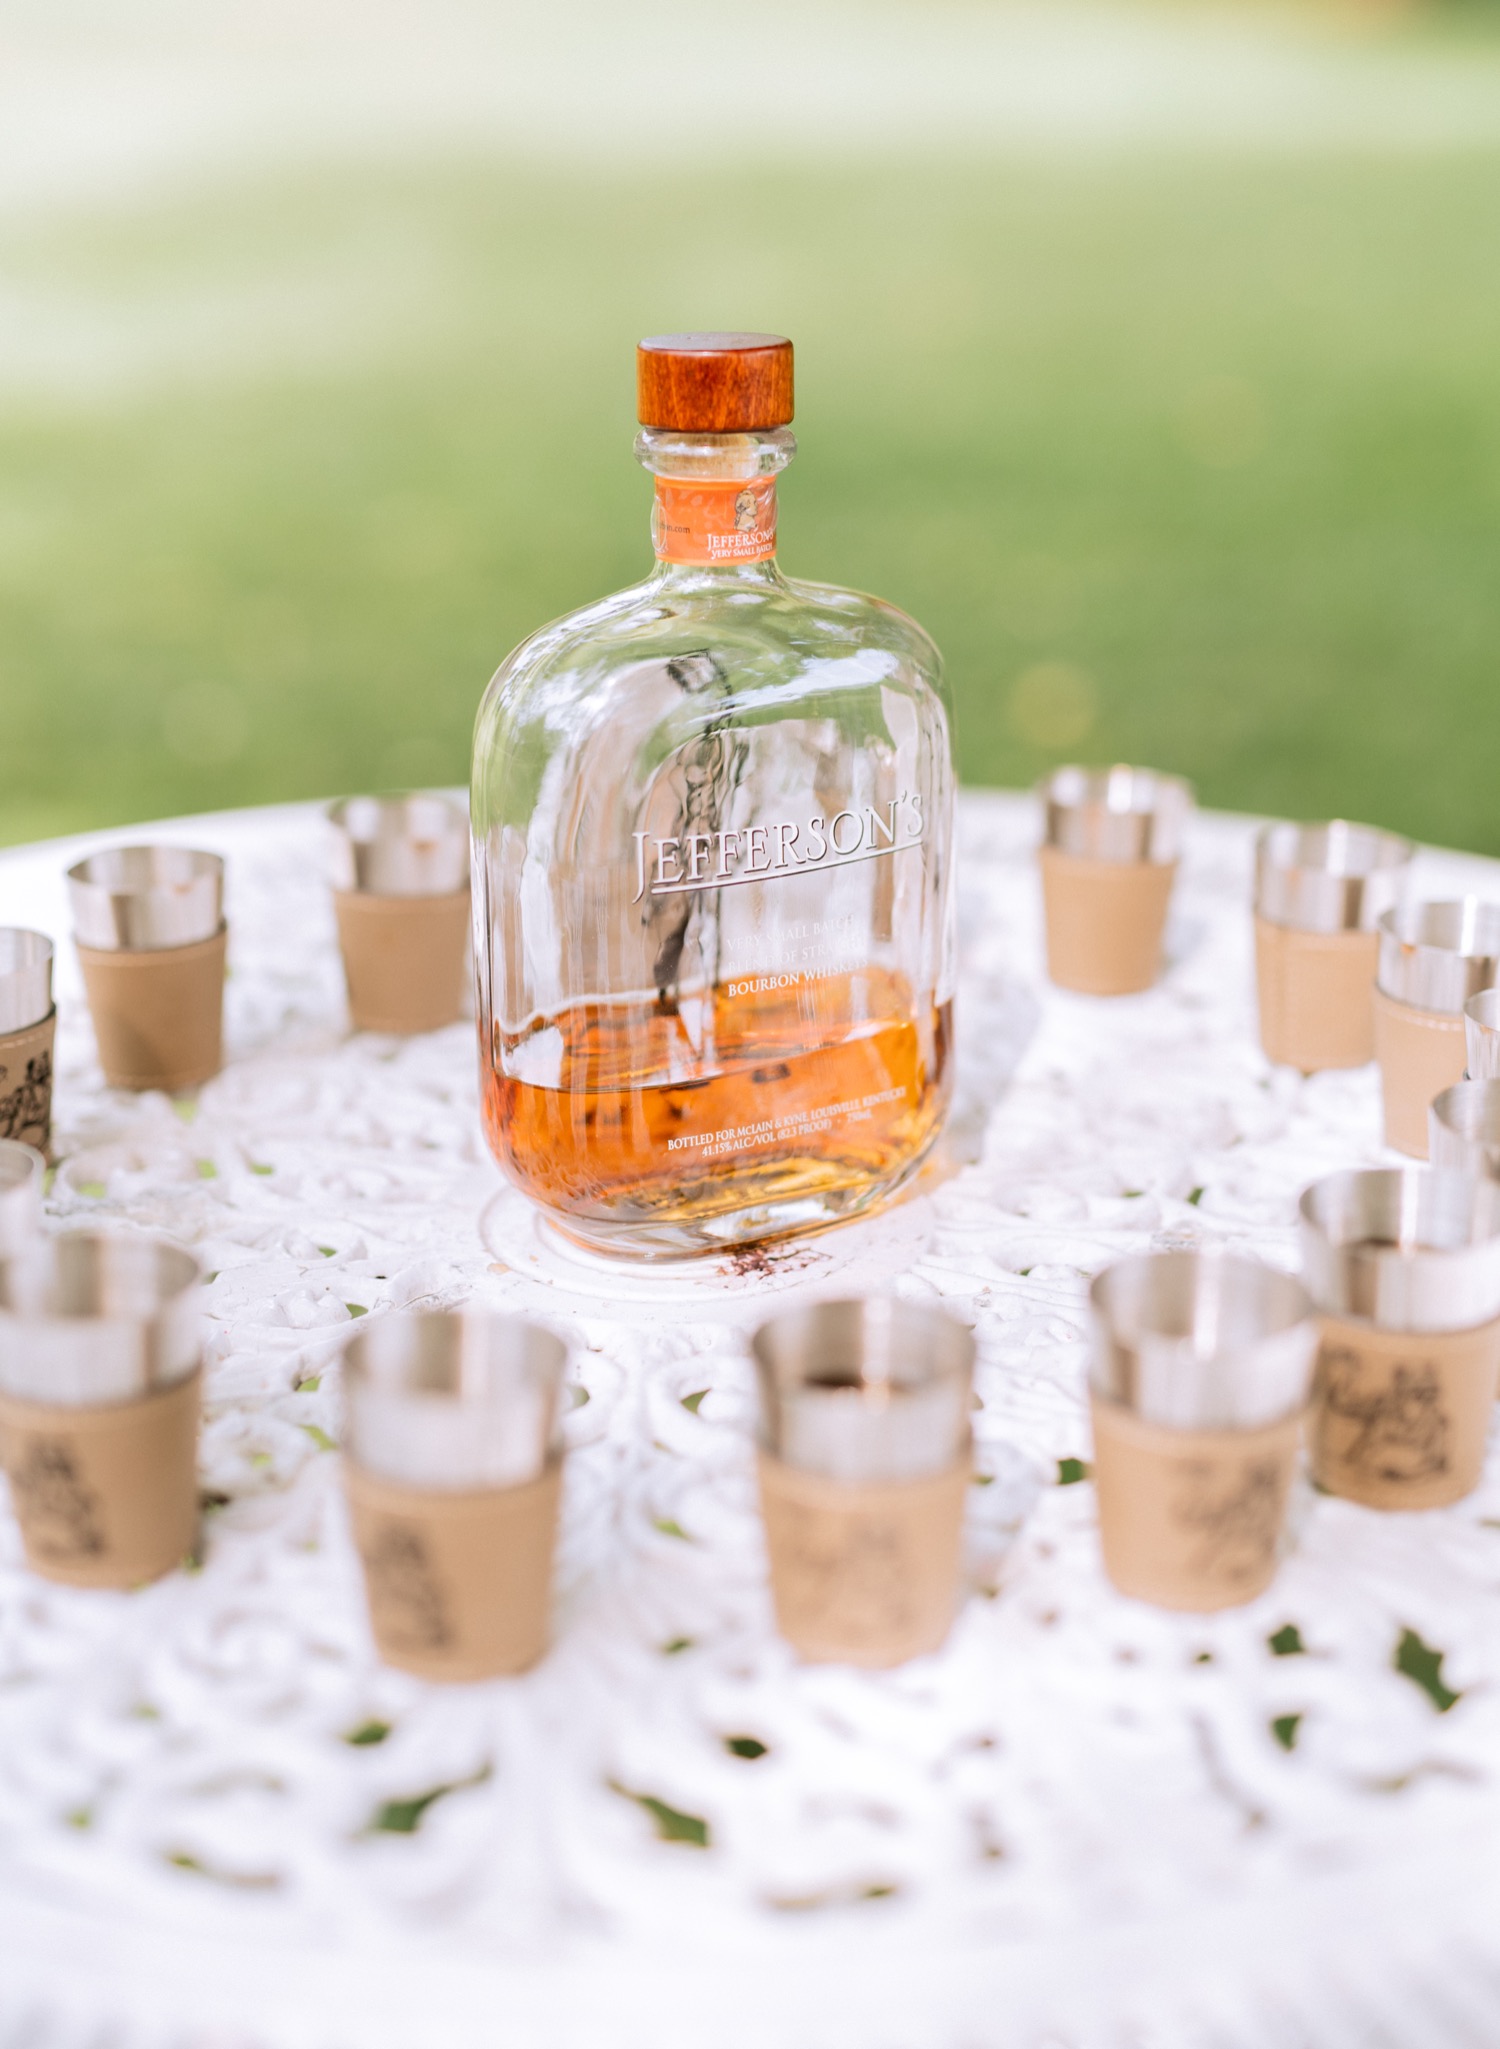 Bottle of bourbon and shot glasses ready for the wedding party to celebrate after the wedding ceremony at Amber Grove in Richmond, Virginia